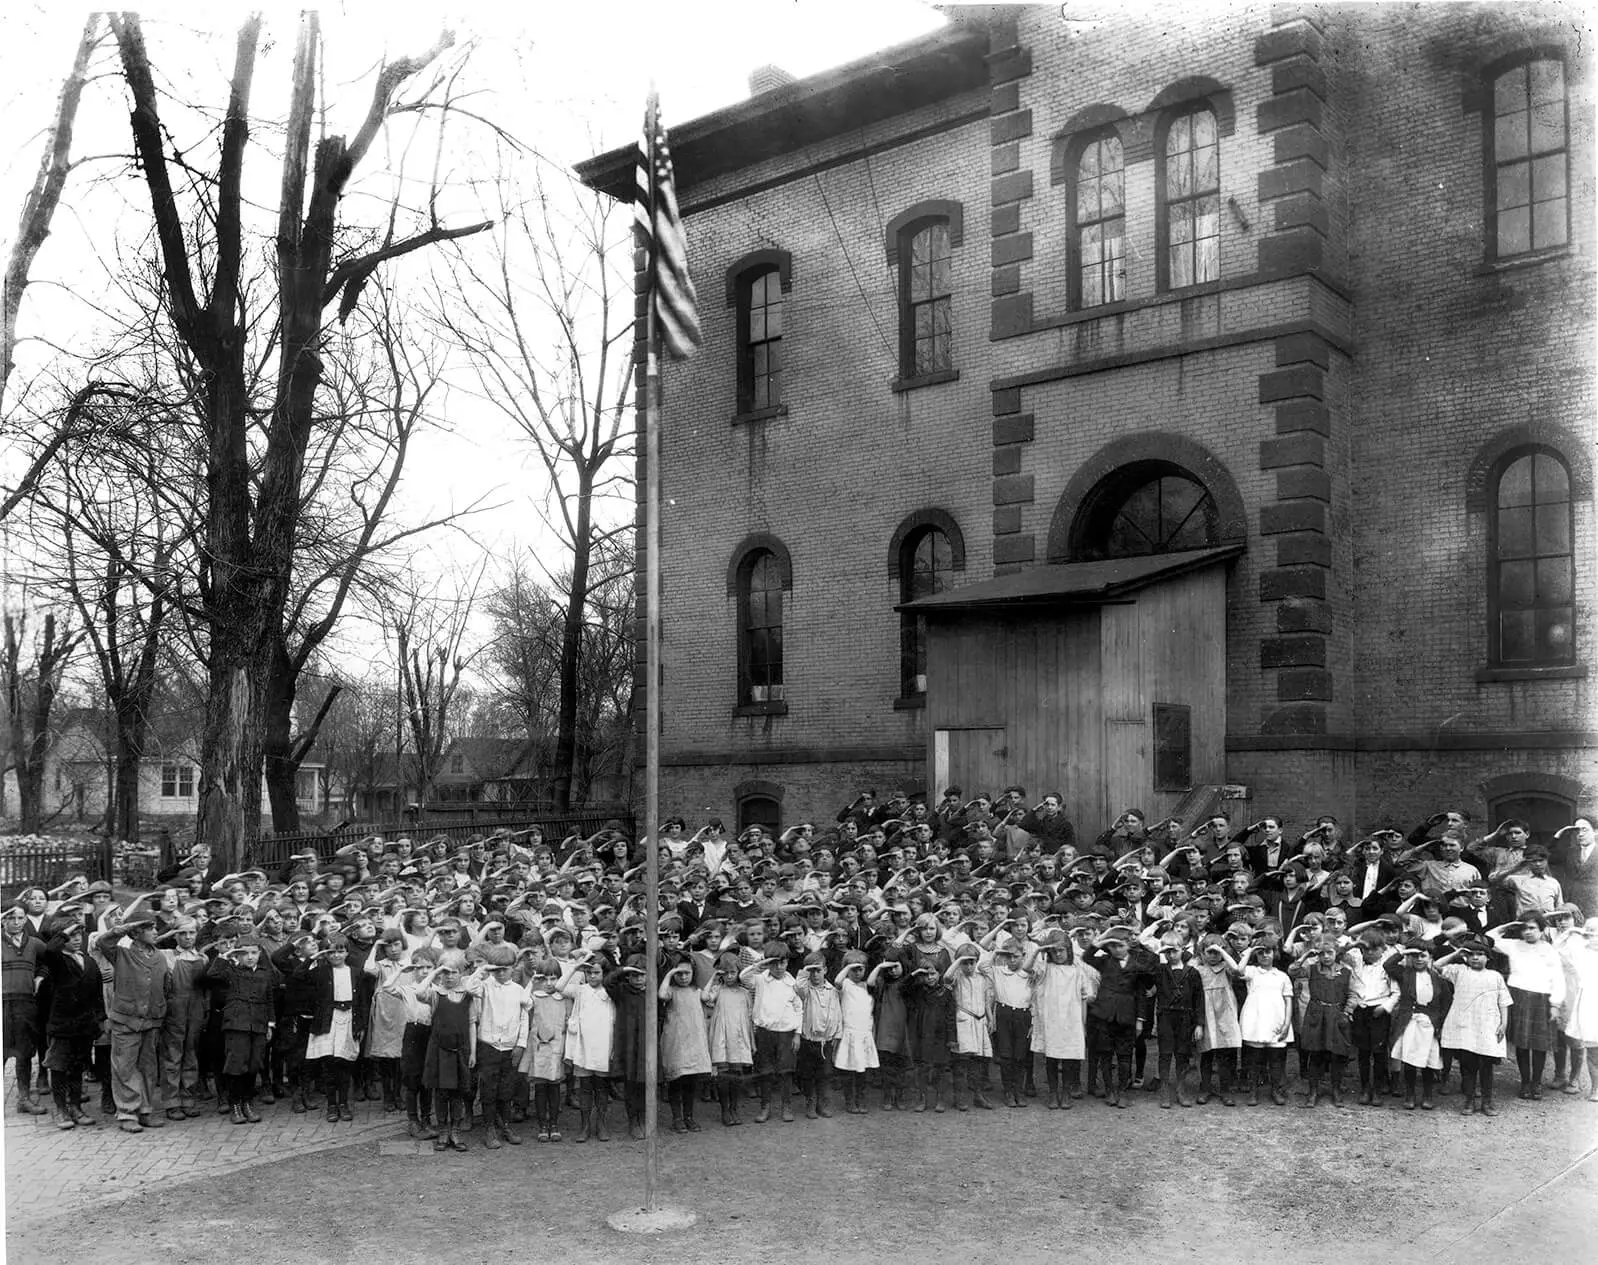 Black and white photo of over 100 schoolchildren touching their hats outside an elementary school.